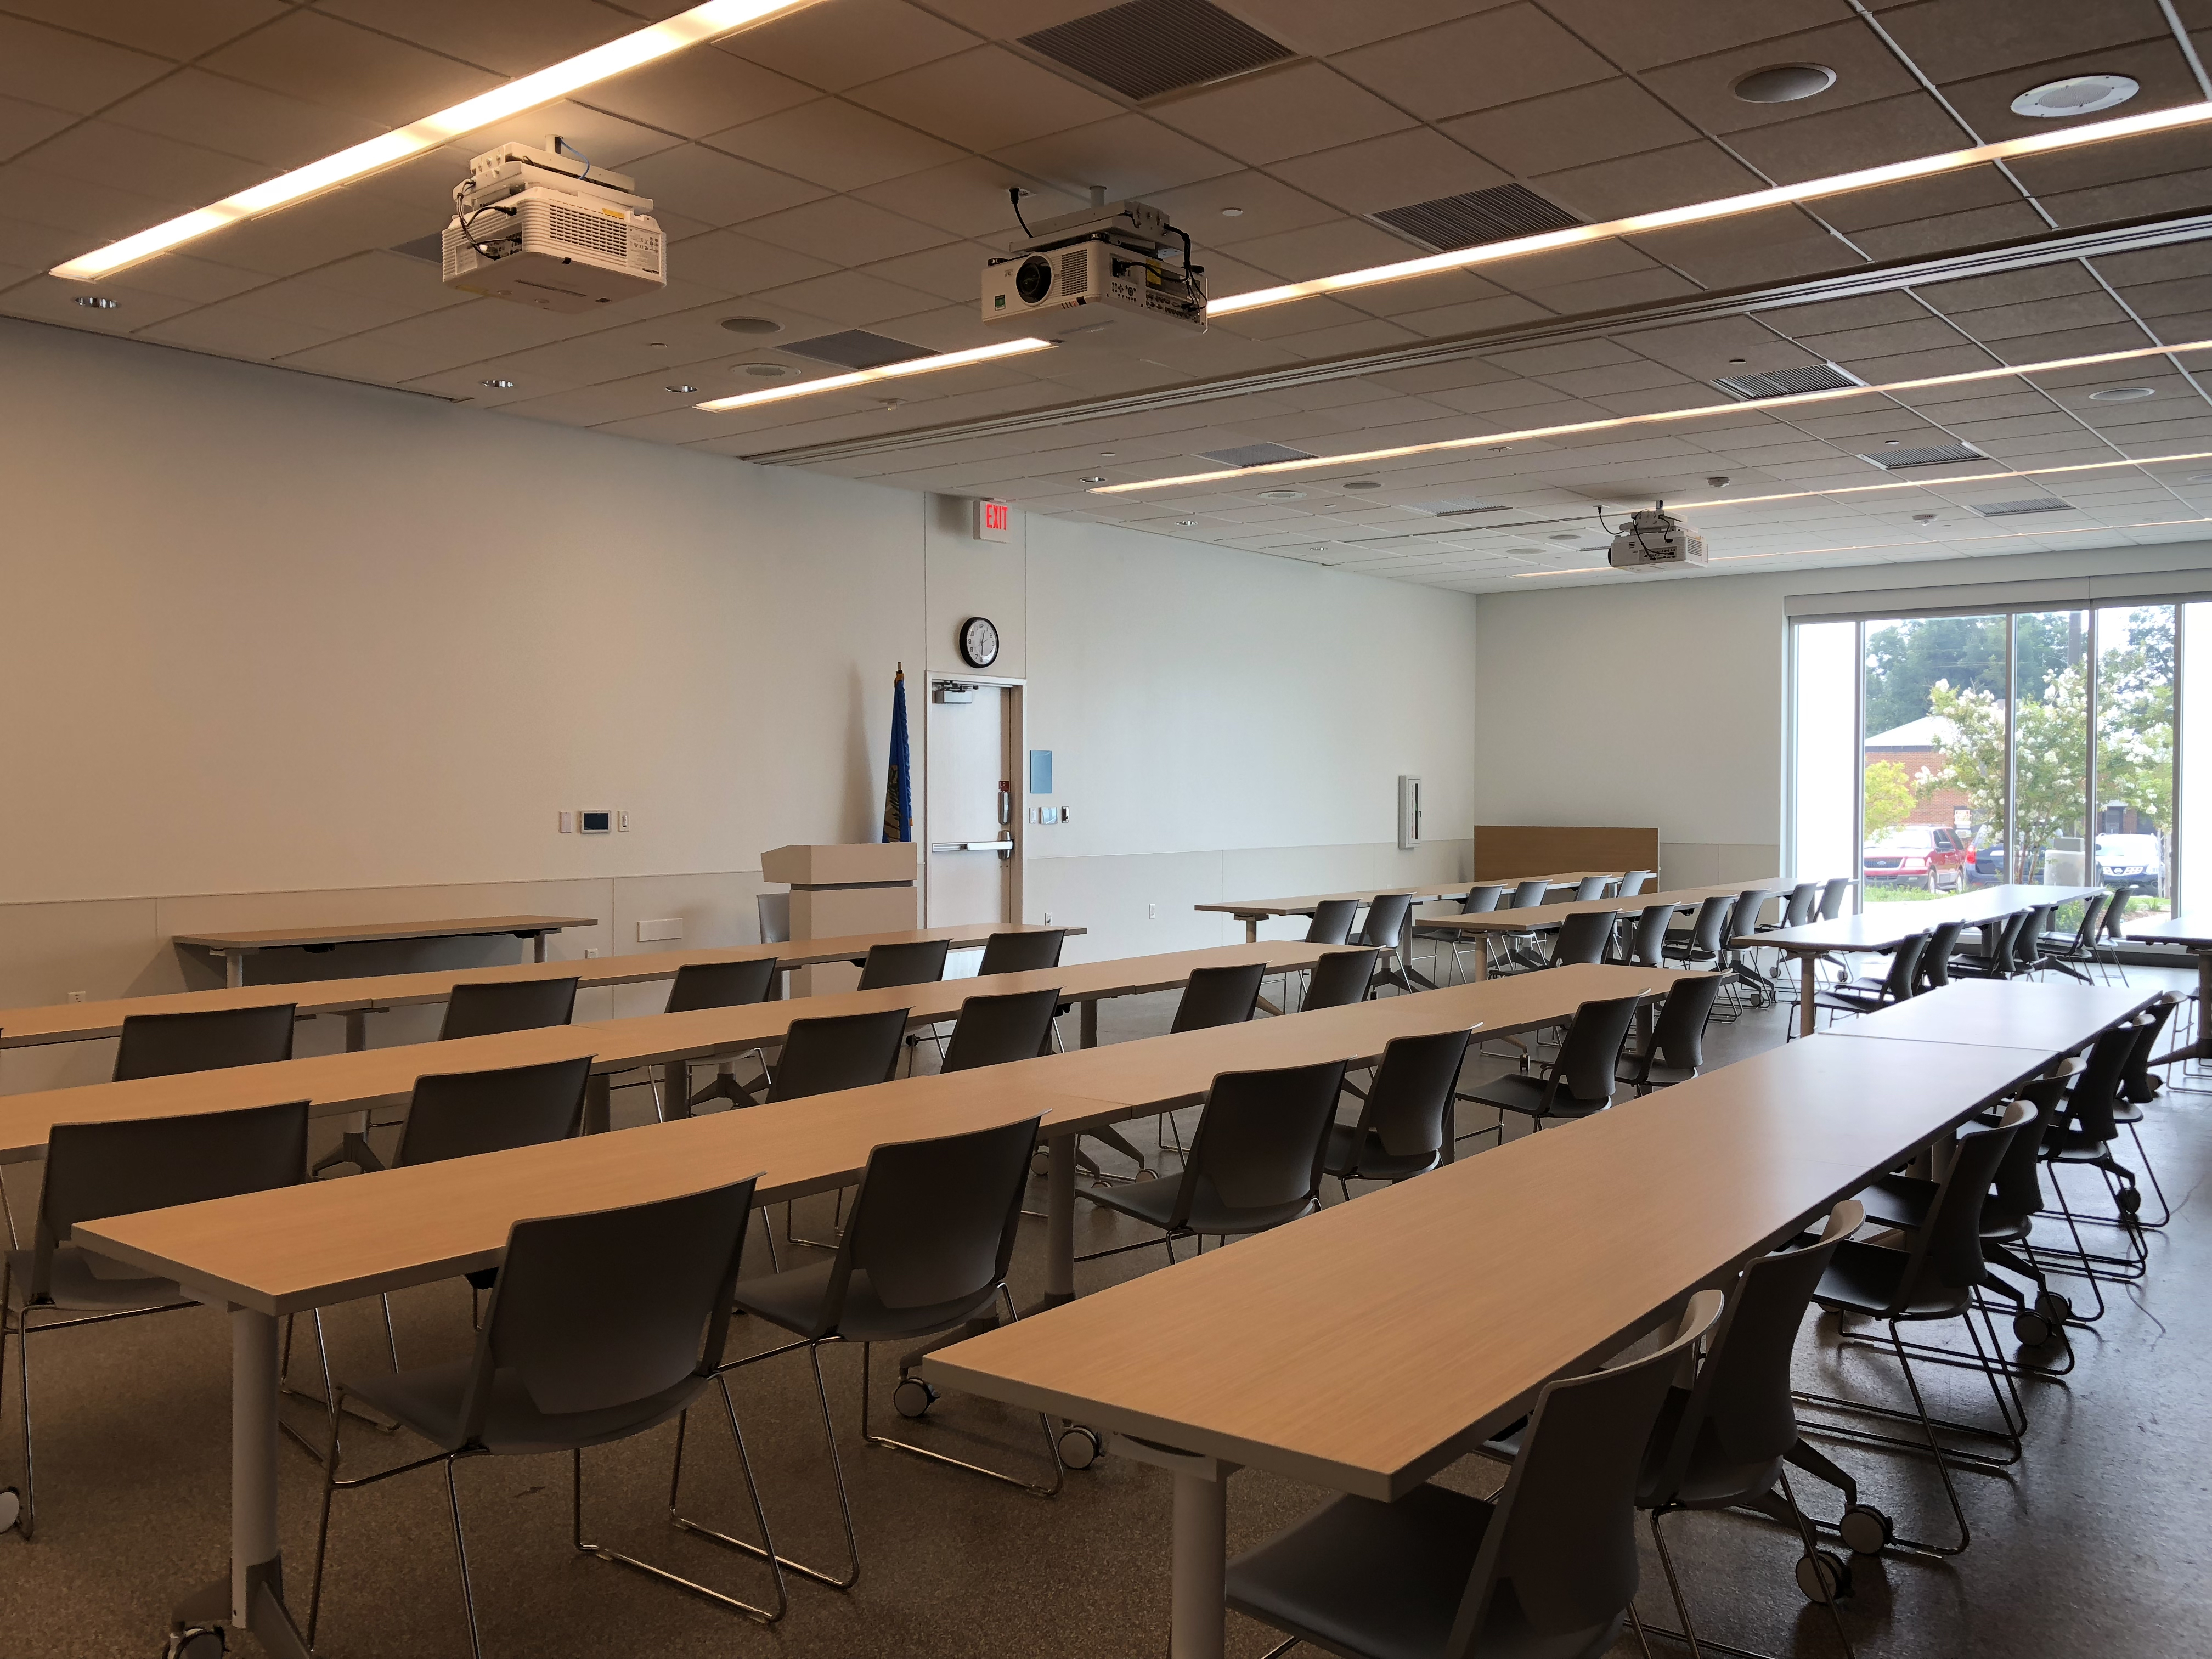 Meeting Room 1 and 2 at Capitol Hill with classroom style seating